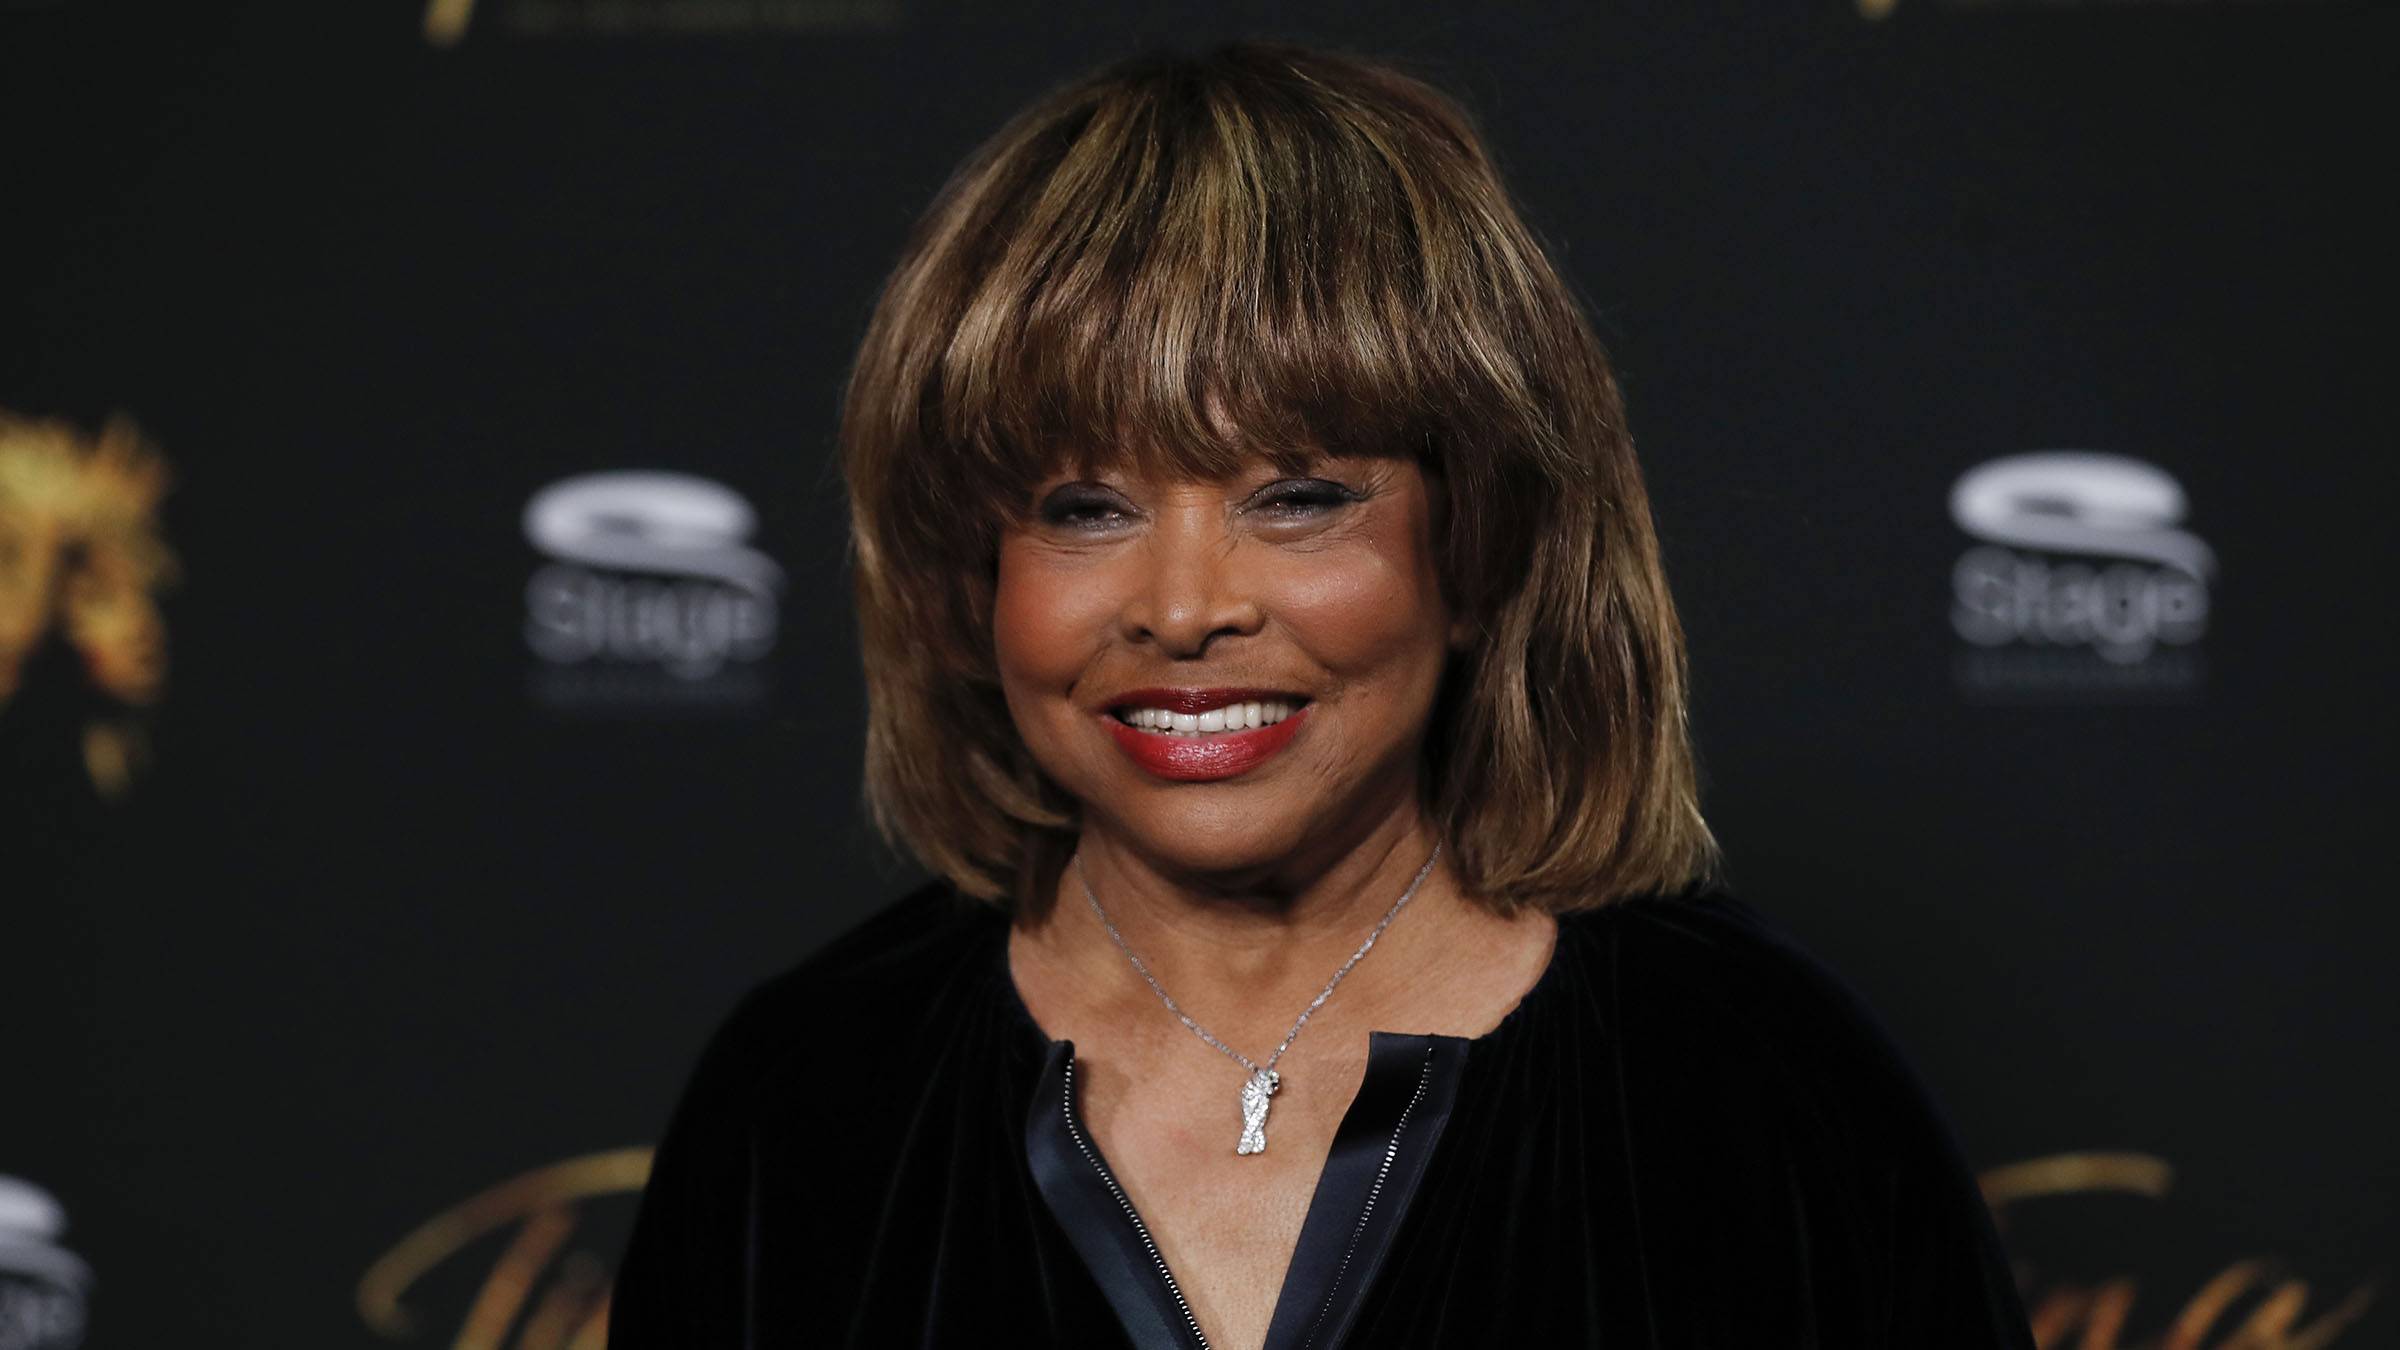 Tina Turner's Children: Everything to Know About the Music Legend's 4 Sons